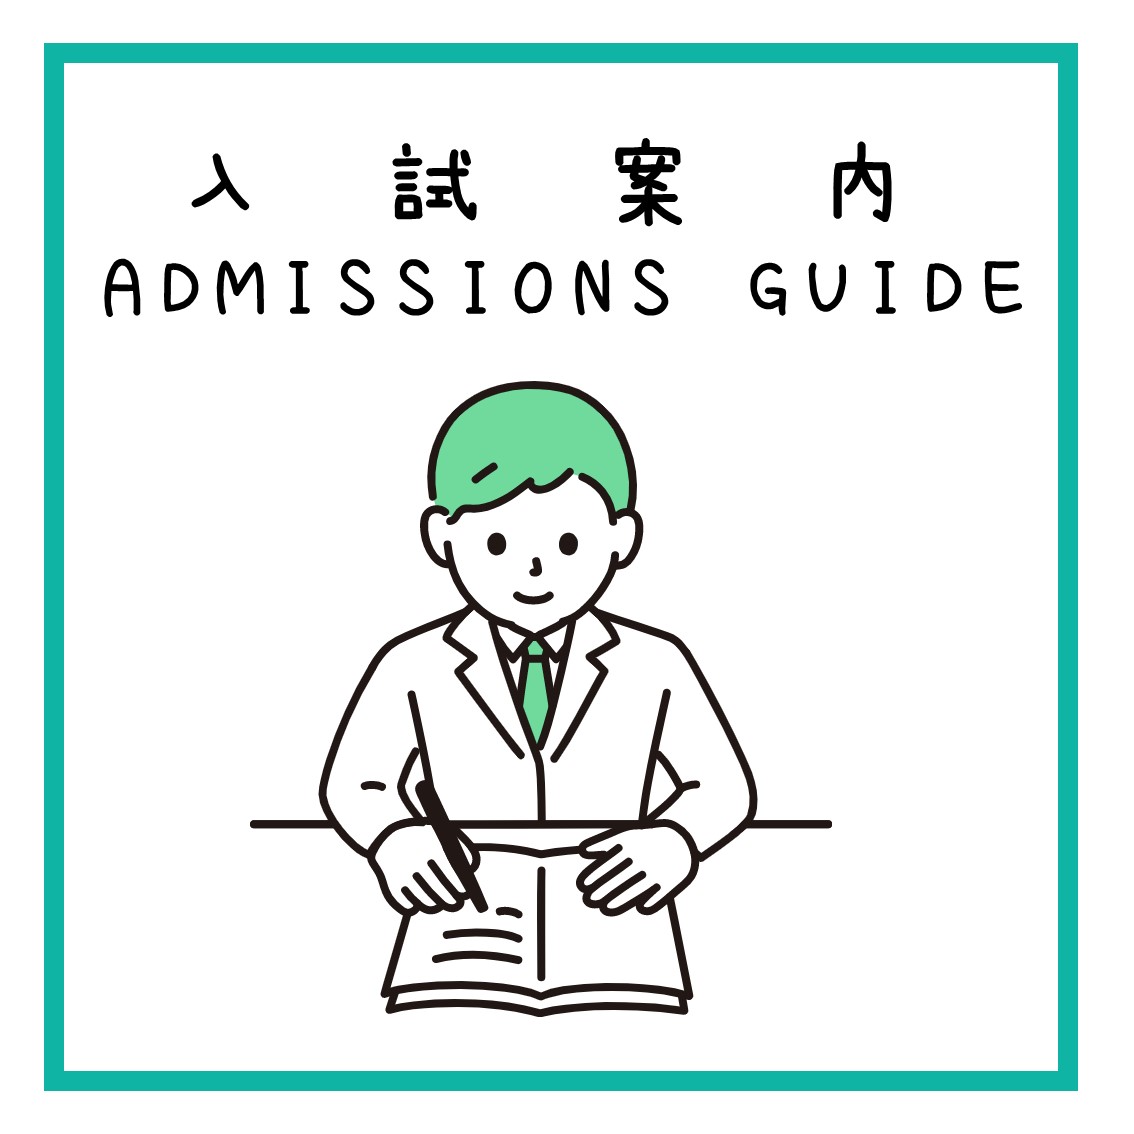 Admission guide